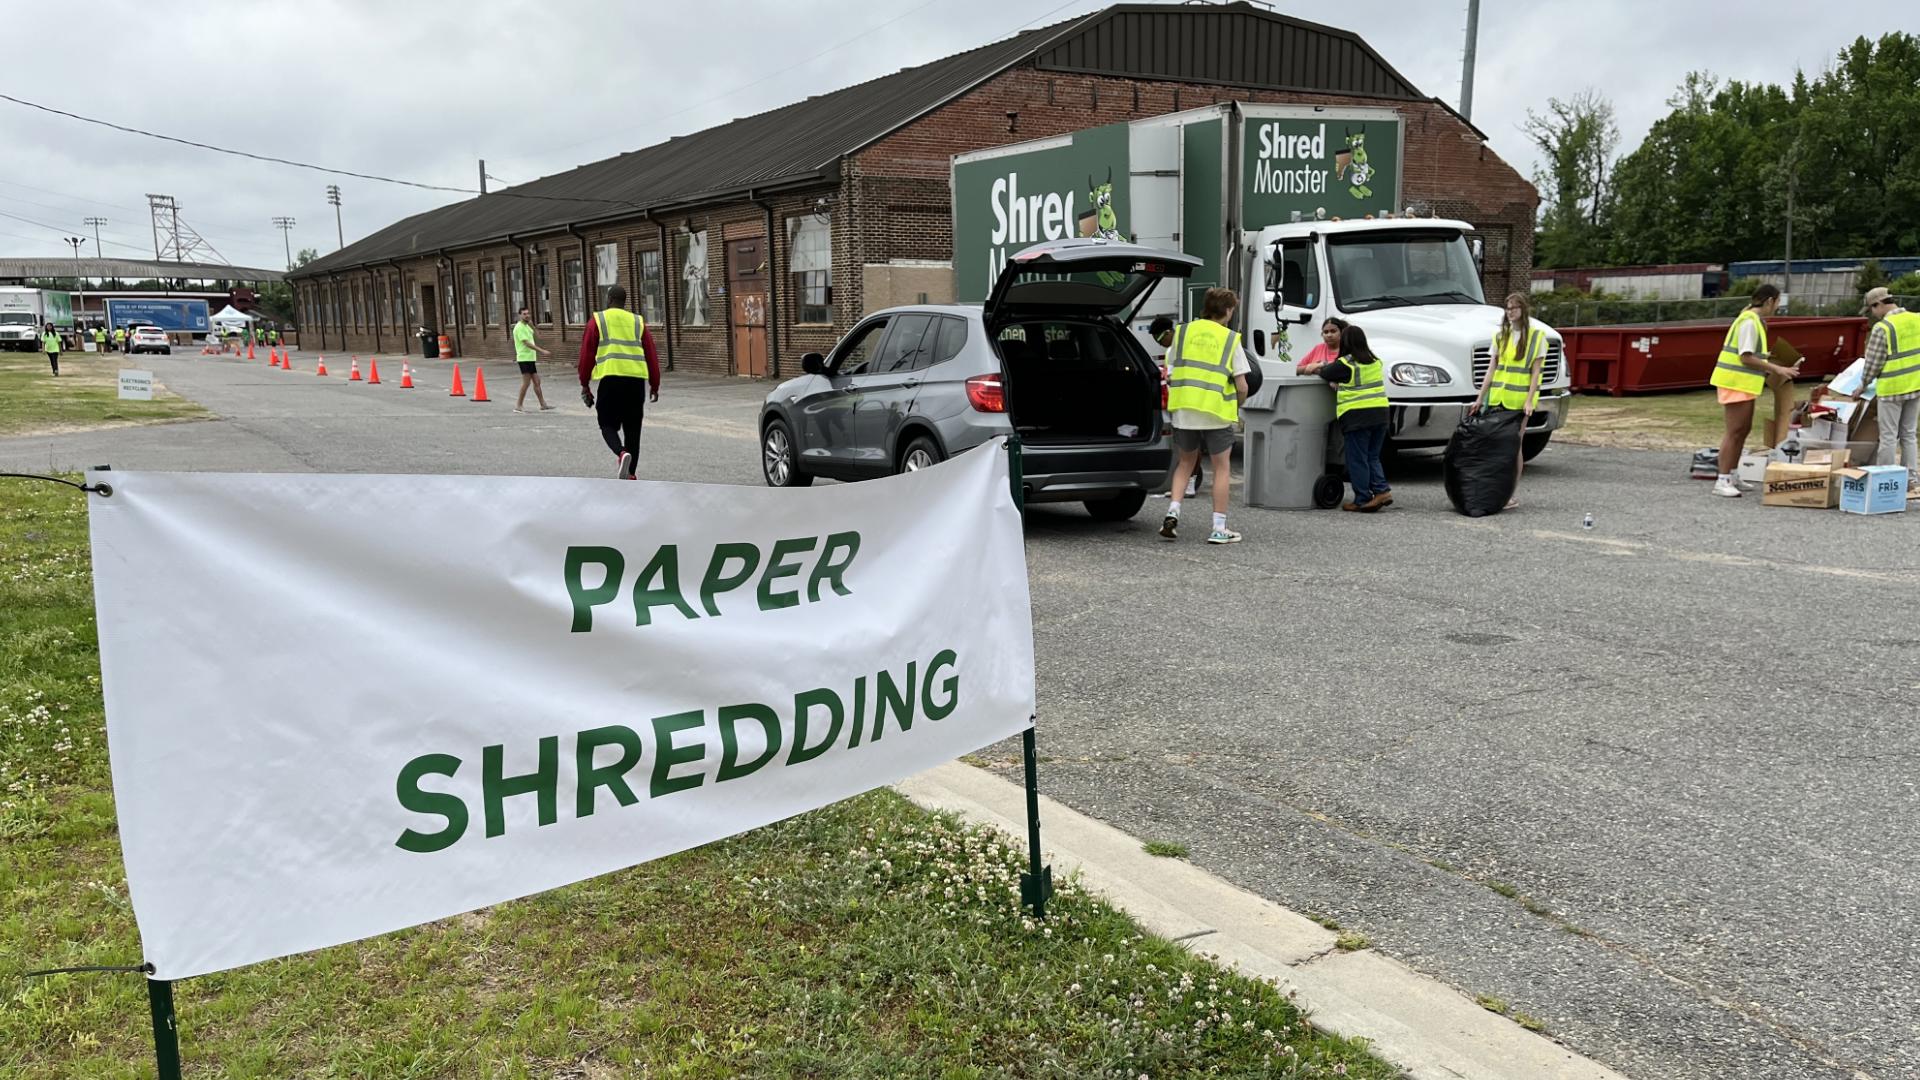 Folks could recycle old electronics, shred old documents, and leftover paint.